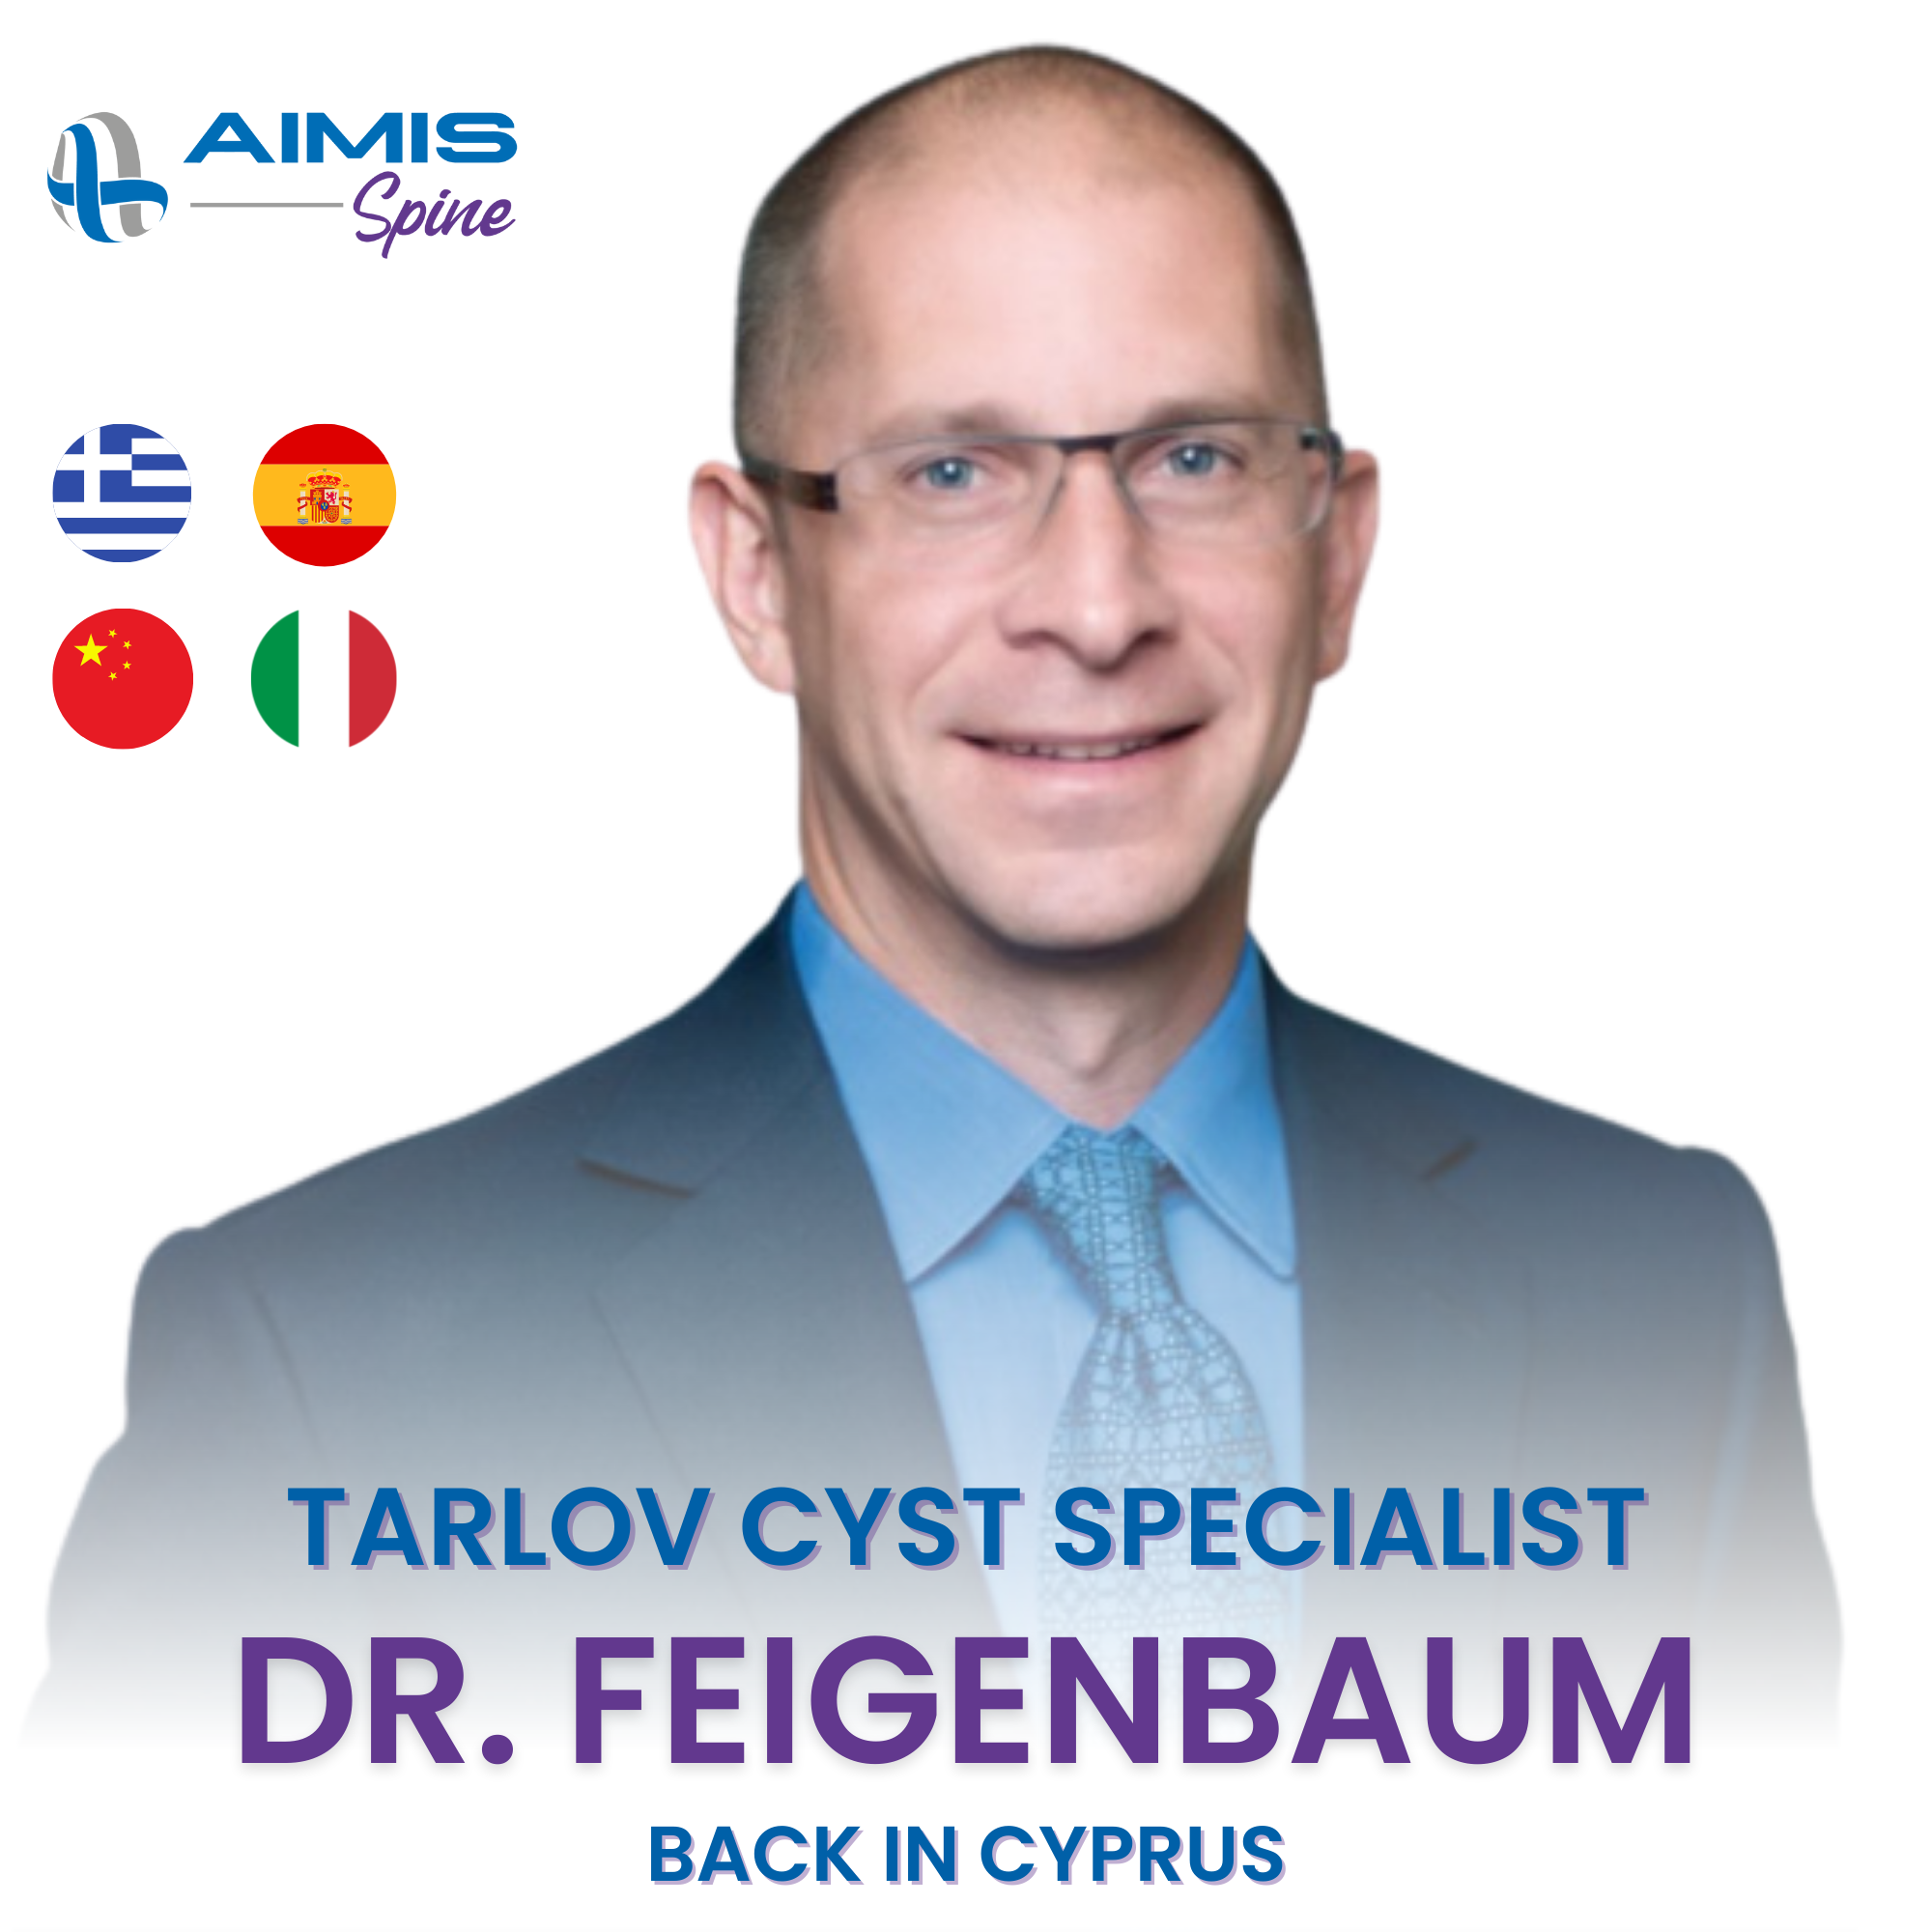 Dr Feigenbaum will once again be in Cyprus In January 2023